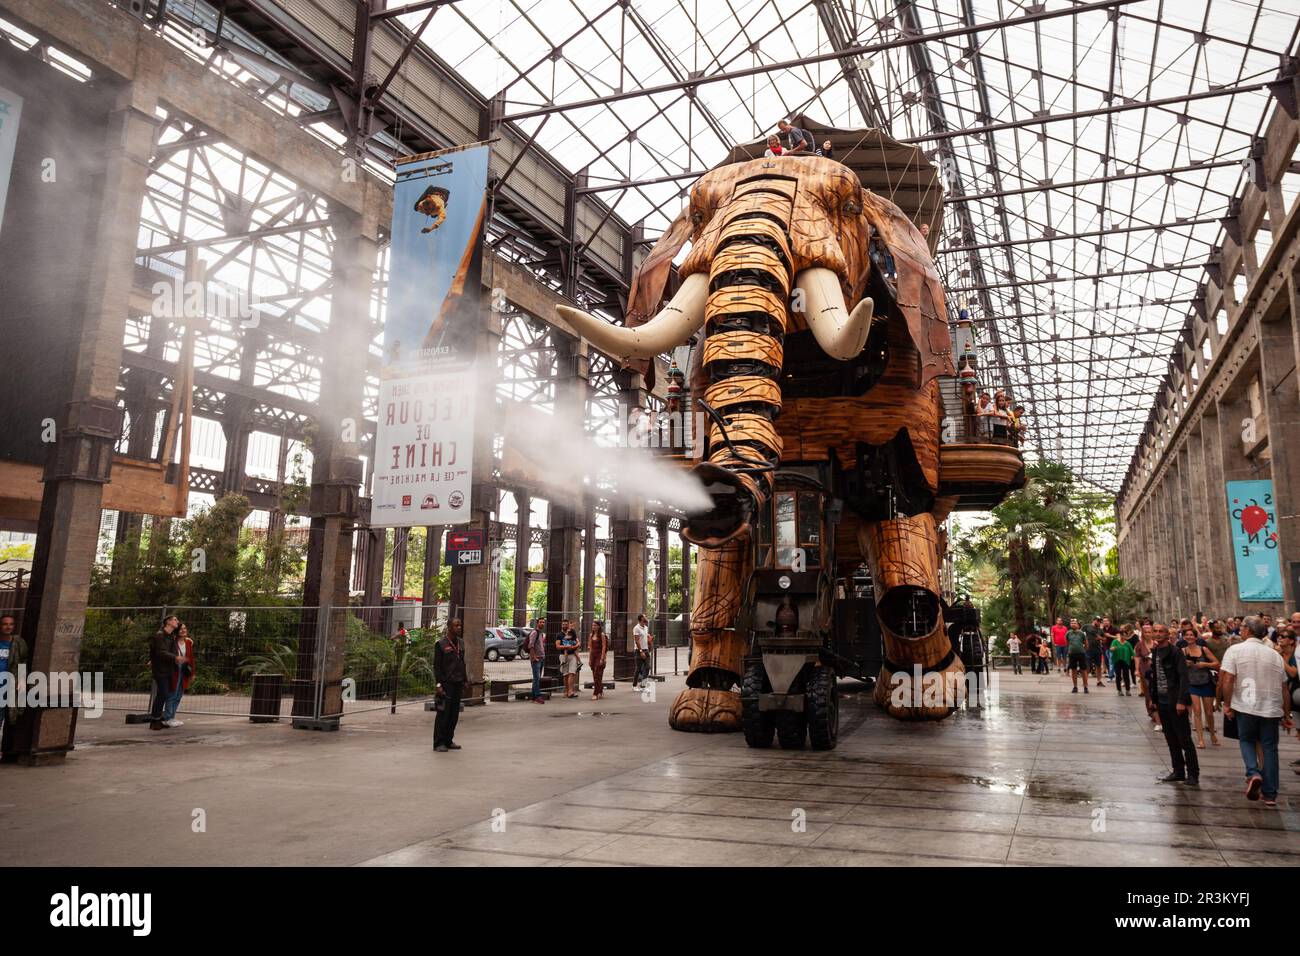 NANTES, FRANCE - SEPTEMBER 16, 2018: Machines of the Isle of Nantes is a artistic, touristic and cultural project based in Nantes, France Stock Photo